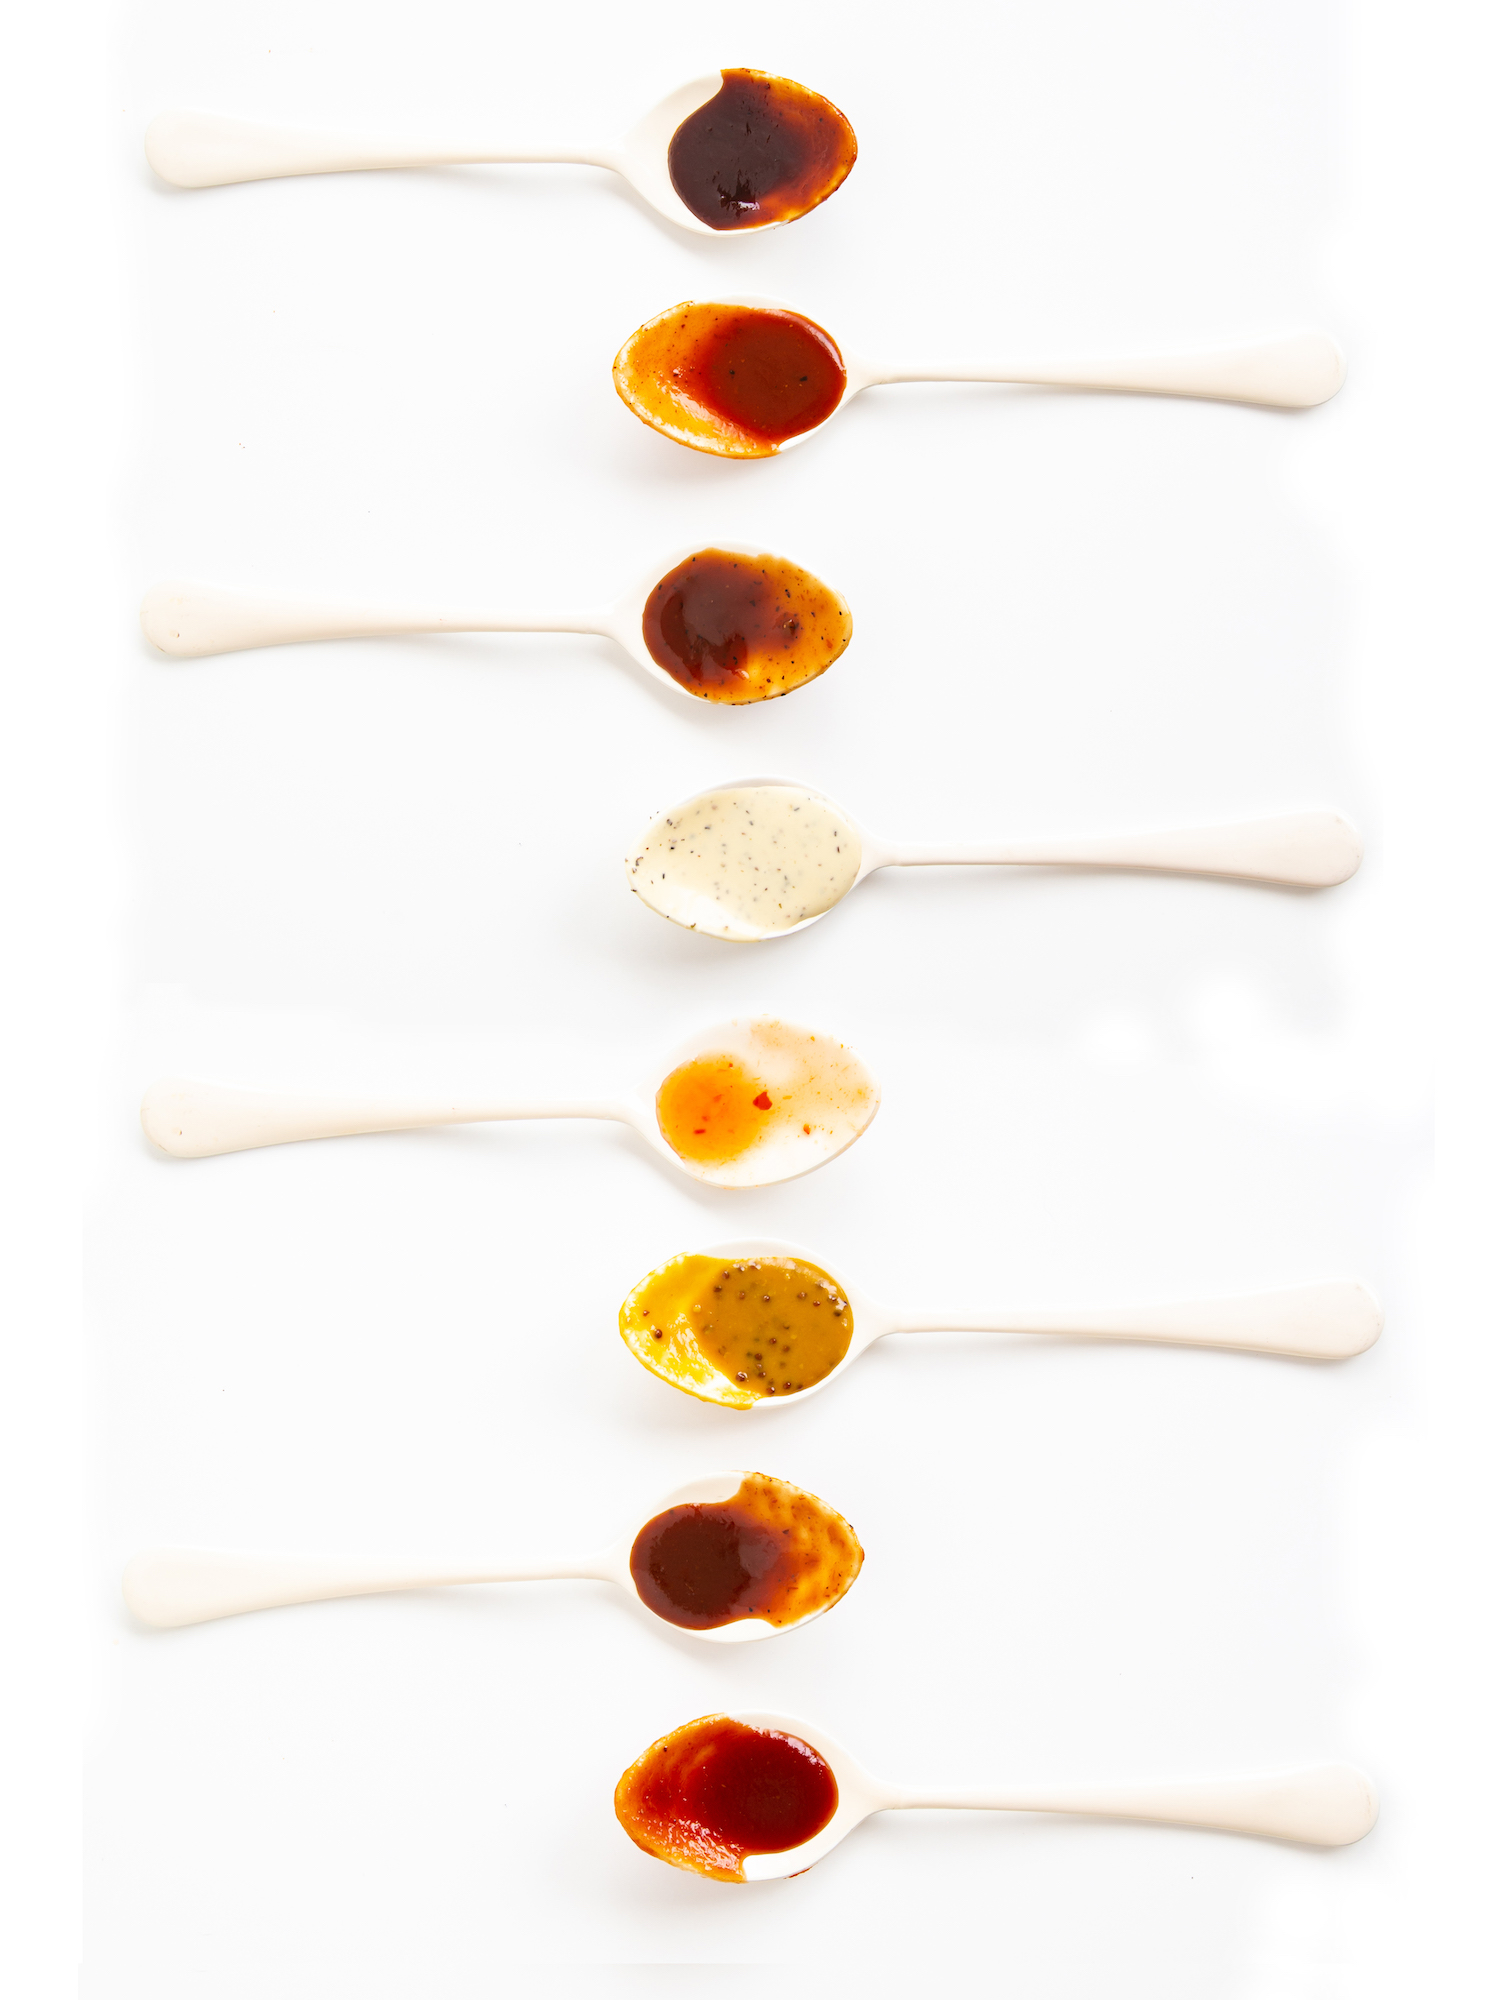 BBQ sauces on spoons